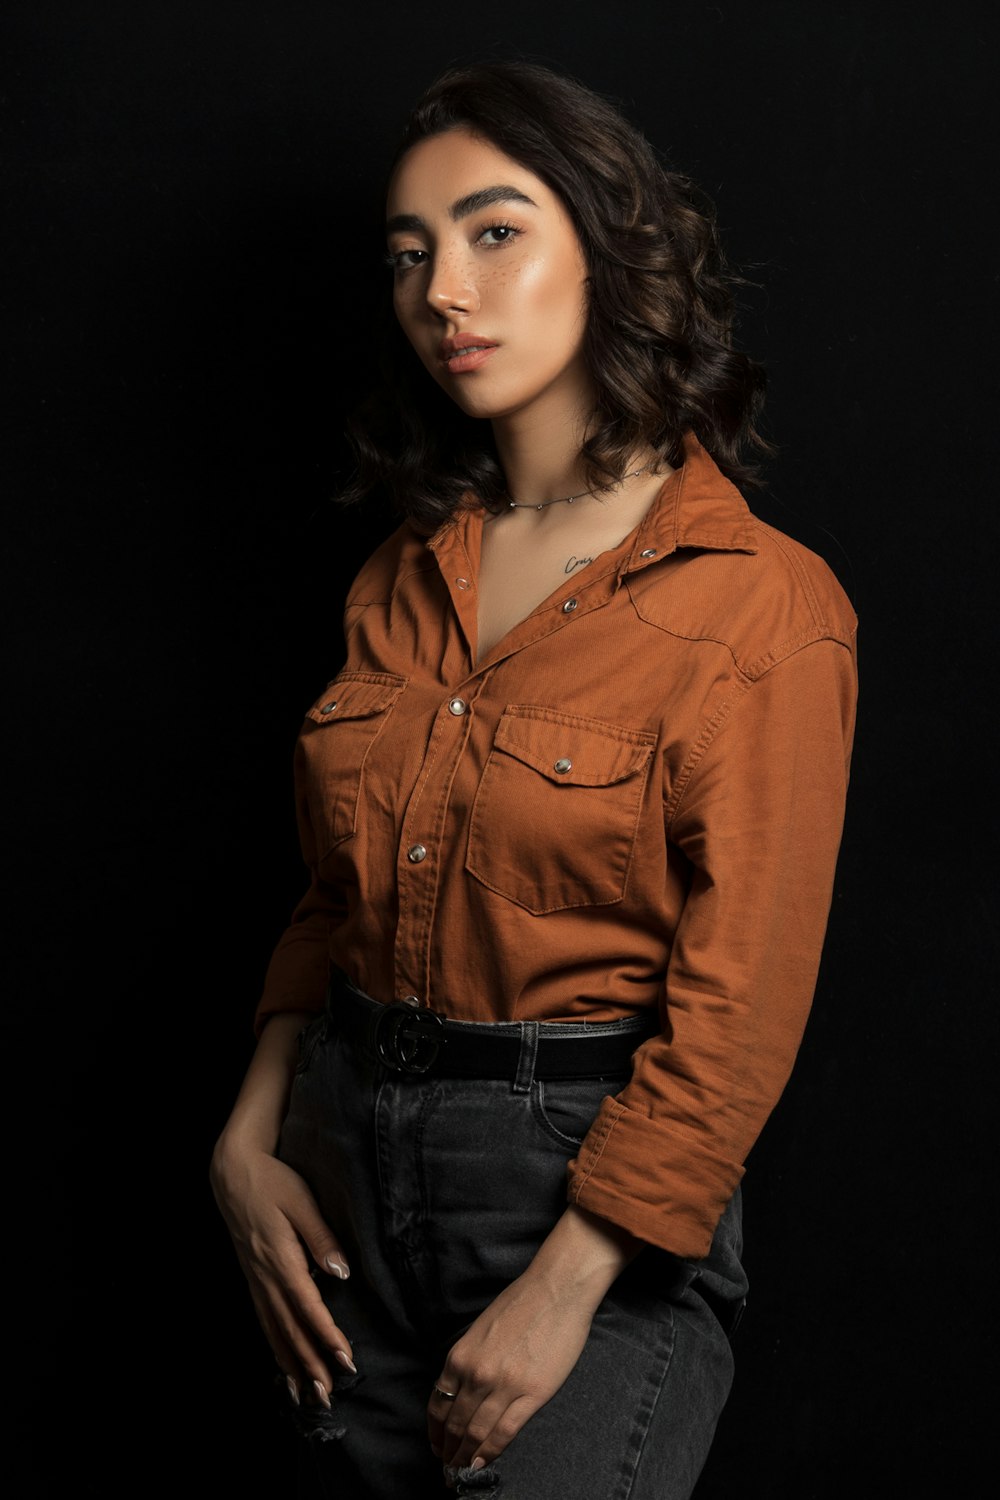 a woman in a brown shirt posing for a picture